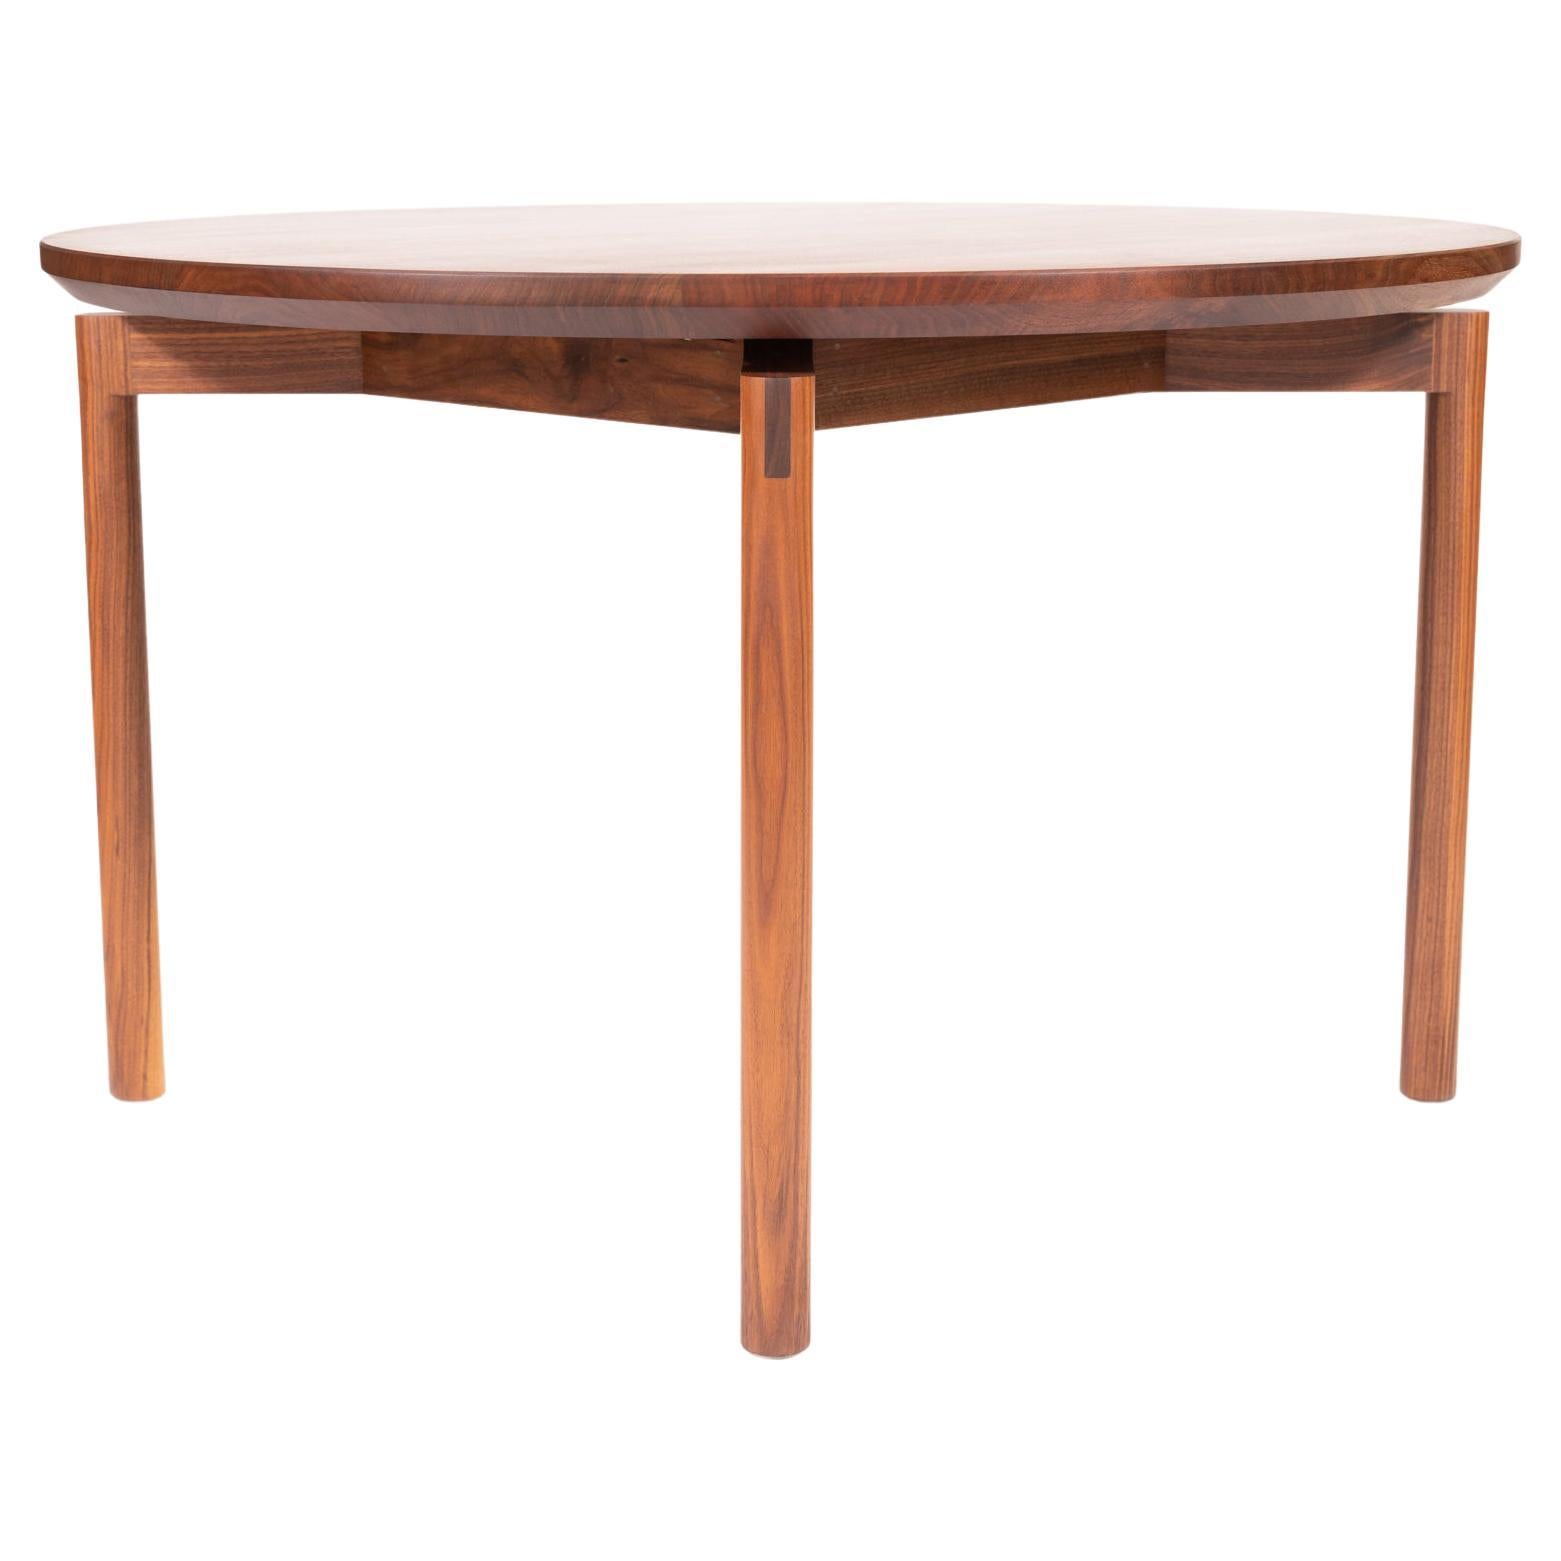 Enso Table, Walnut Dining Table with Knife-Edge and Exposed Joinery For Sale